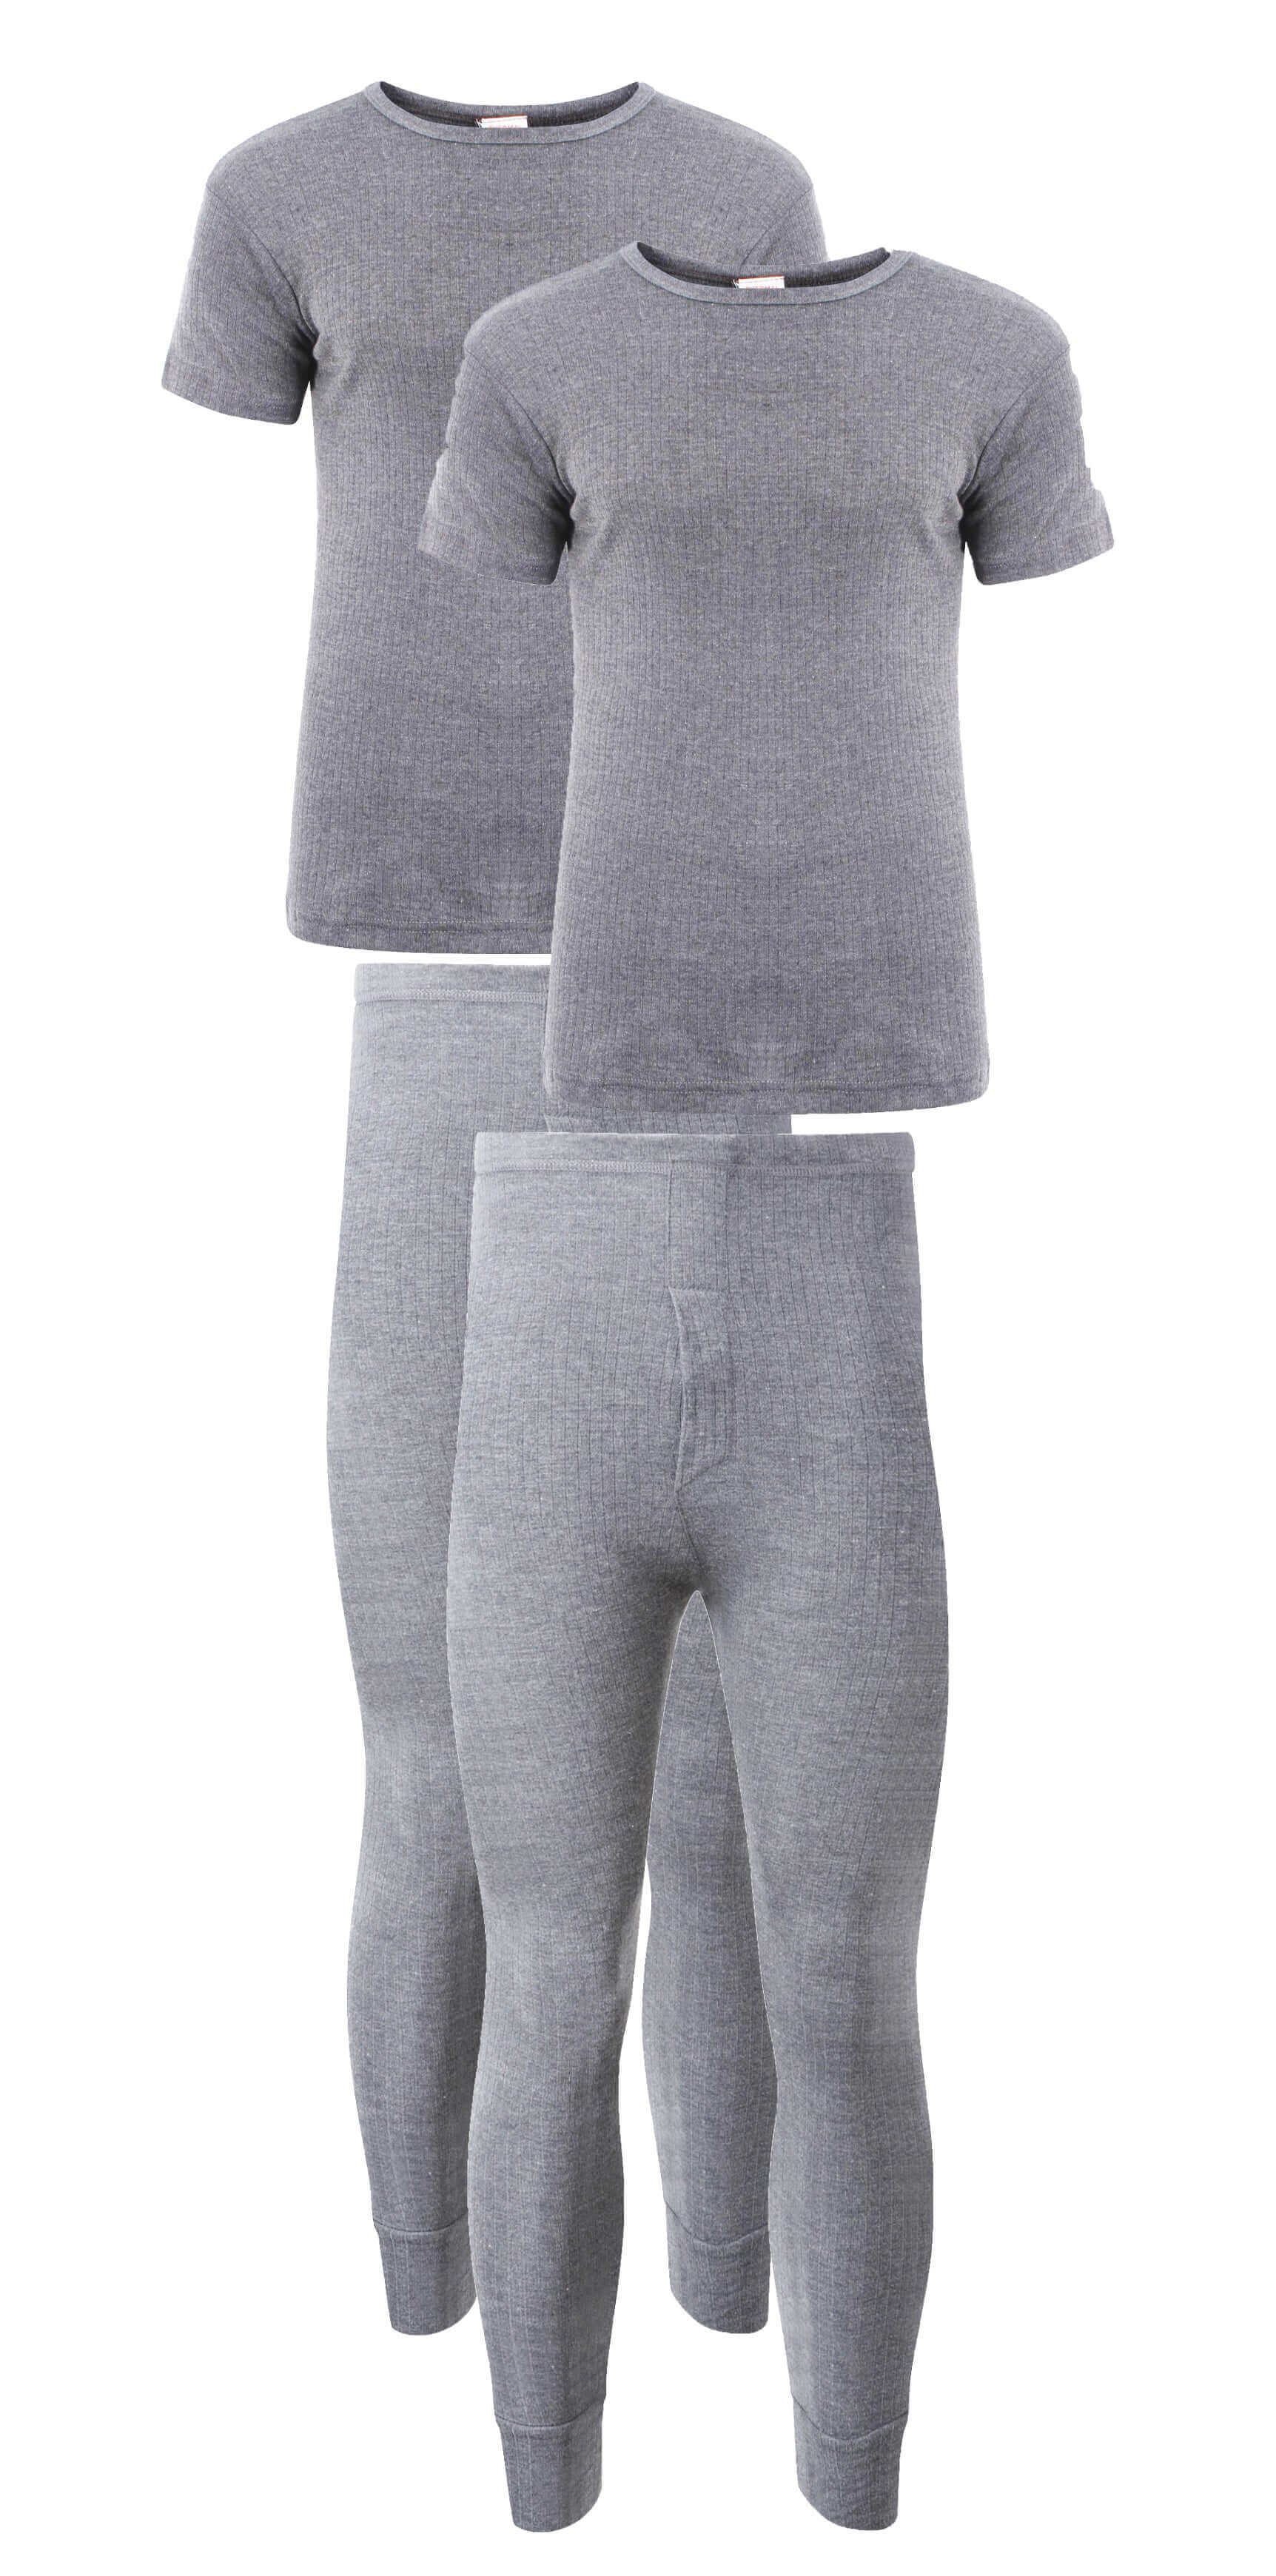 Large, XL White, Grey Mens Thermal Underwear Set at Rs 400/set in